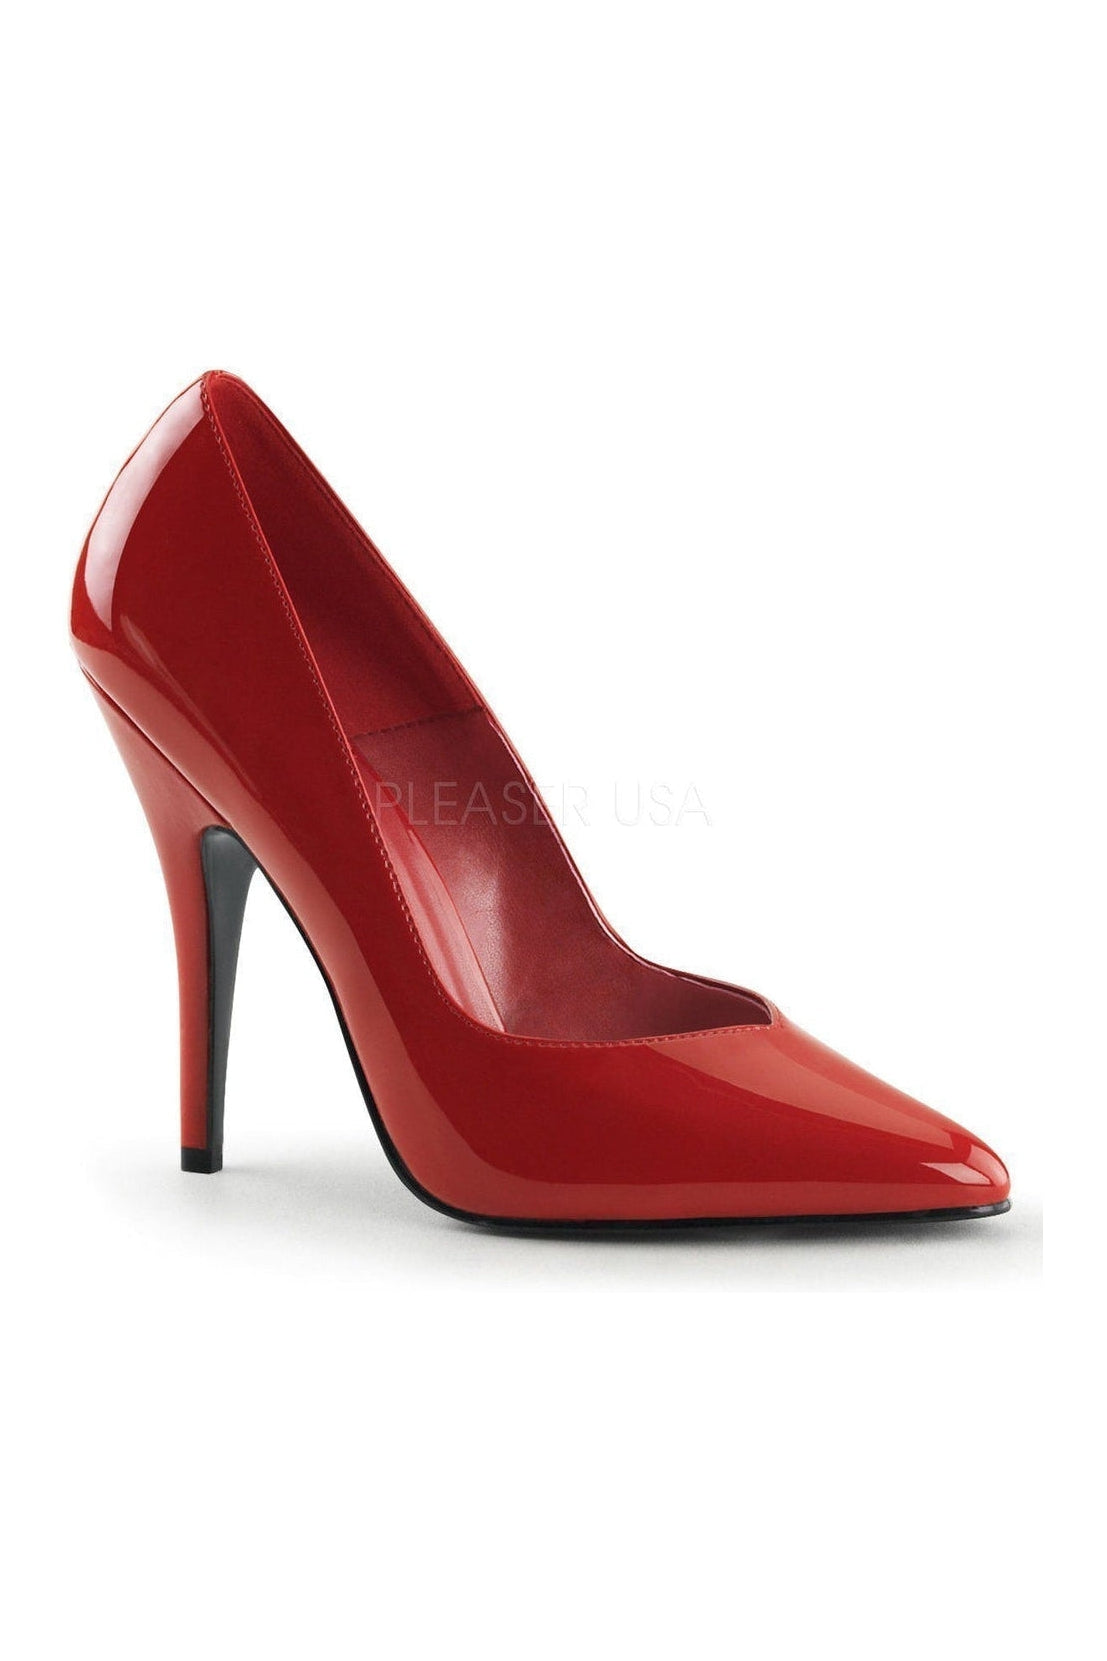 Pleaser | Pump | | Free over $79 | | SEXYSHOES.COM